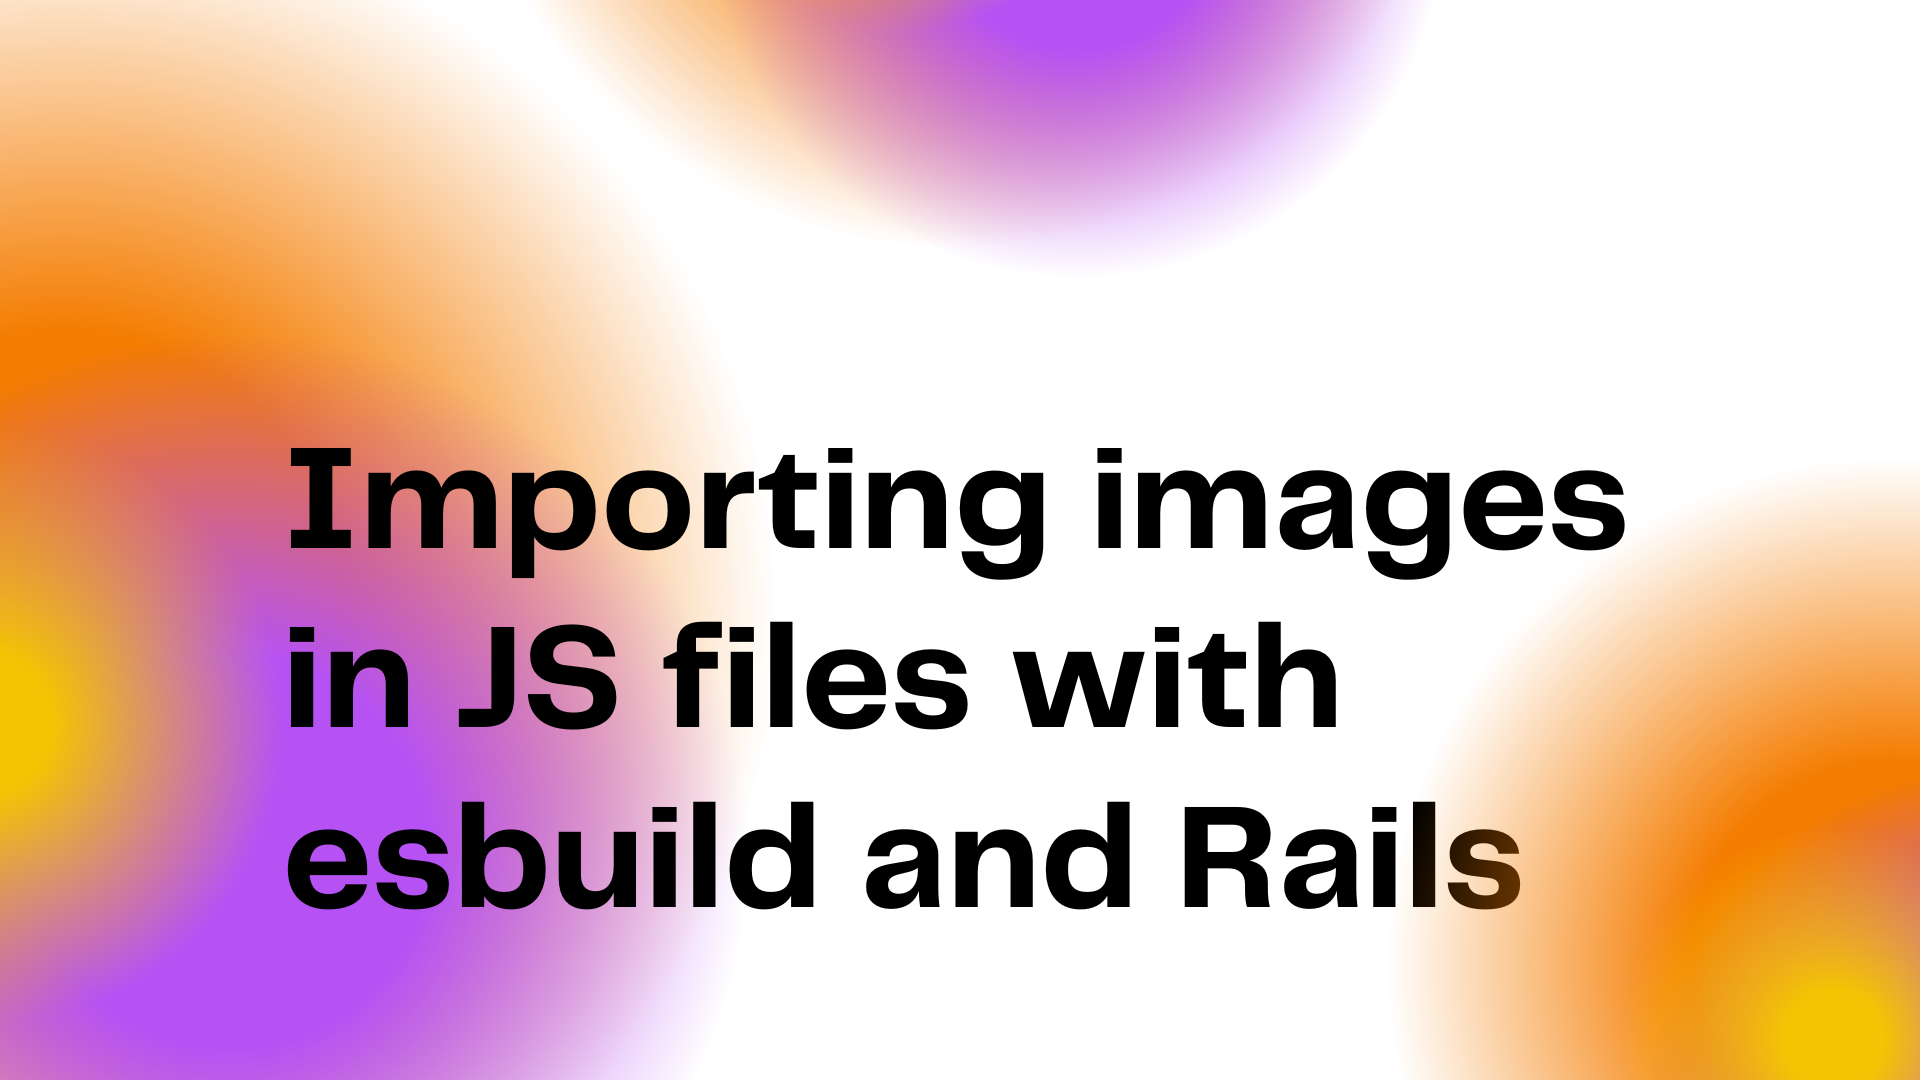 Importing images in JS files with esbuild and Rails